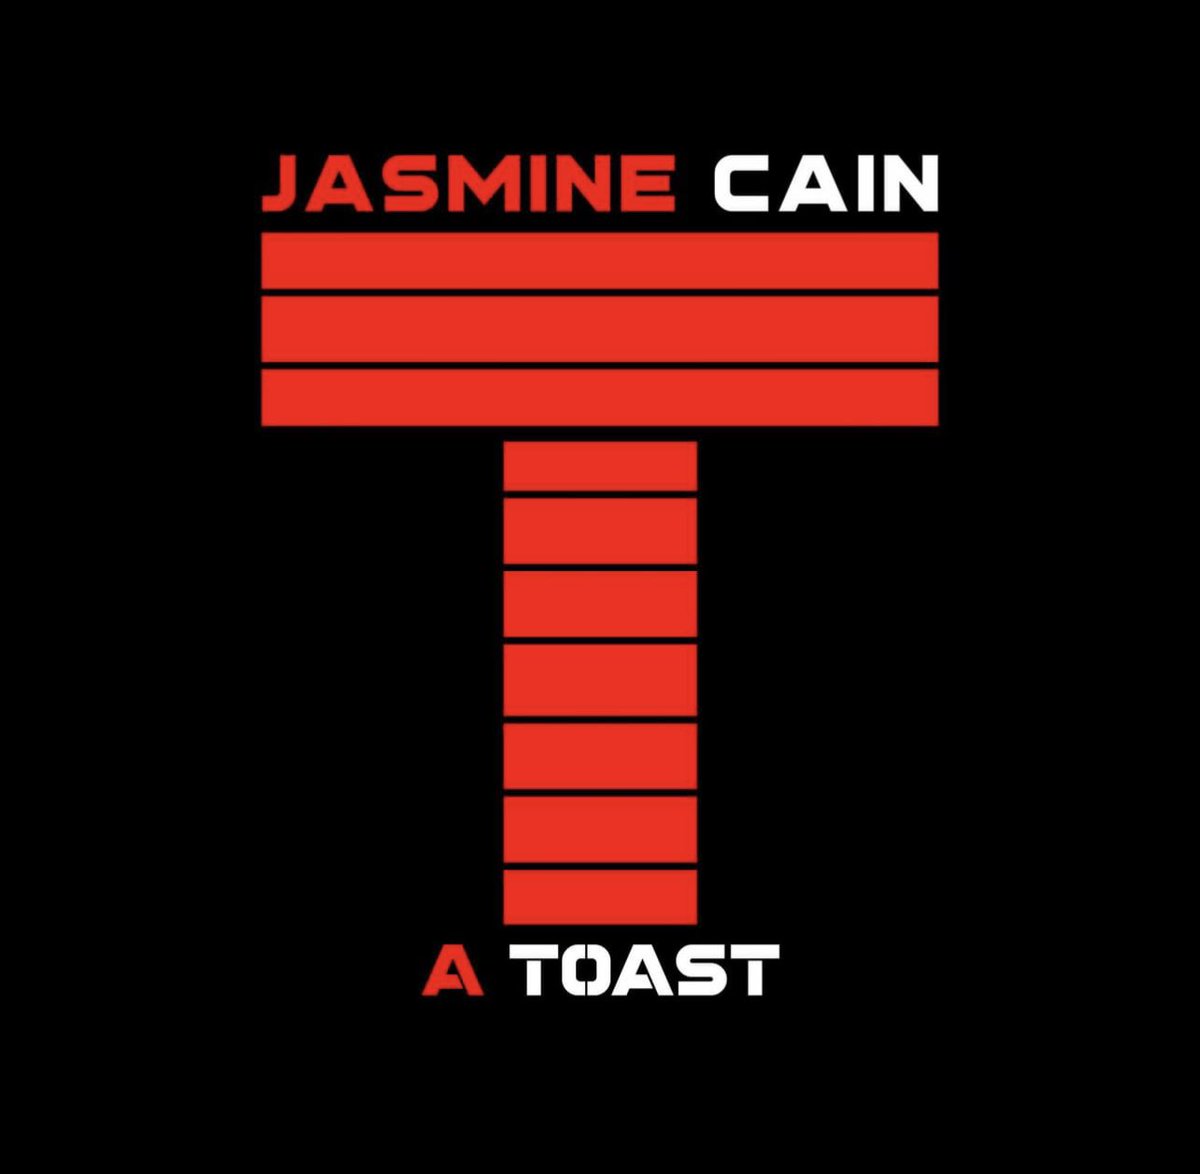 Tomorrow we release our new single 'A Toast'! Please take a moment to have a listen. We've also released the lyric video if you want to see the lyrics on our youtube channel. Youtube.com/missjasminecain The whole shebang launches at midnight! I love you all! Merry Christmas! #AToast